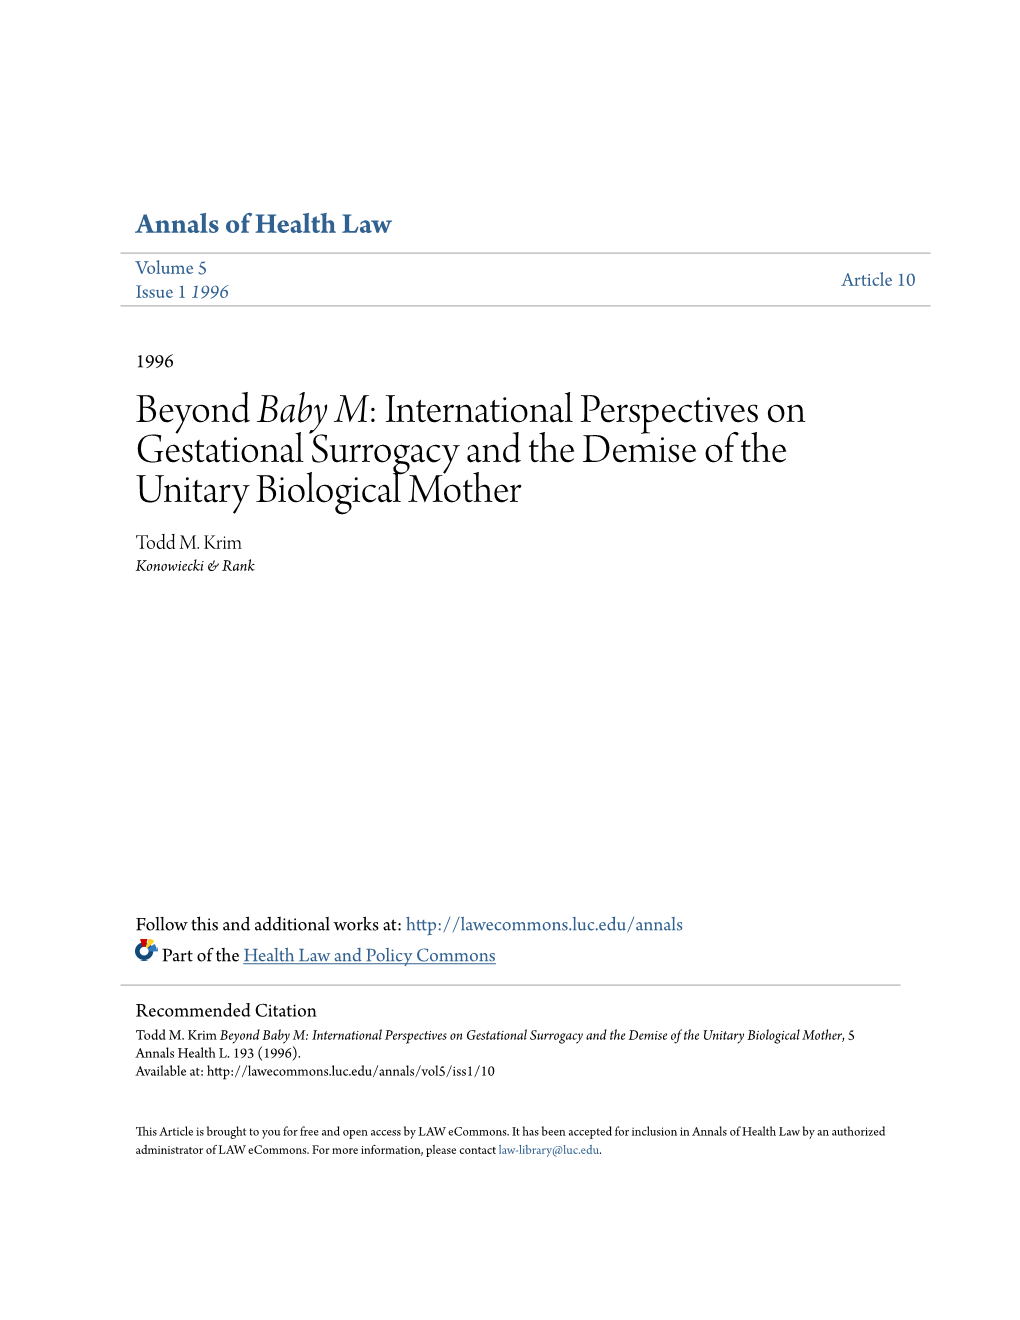 Beyond Baby M: International Perspectives on Gestational Surrogacy and the Demise of the Unitary Biological Mother Todd M